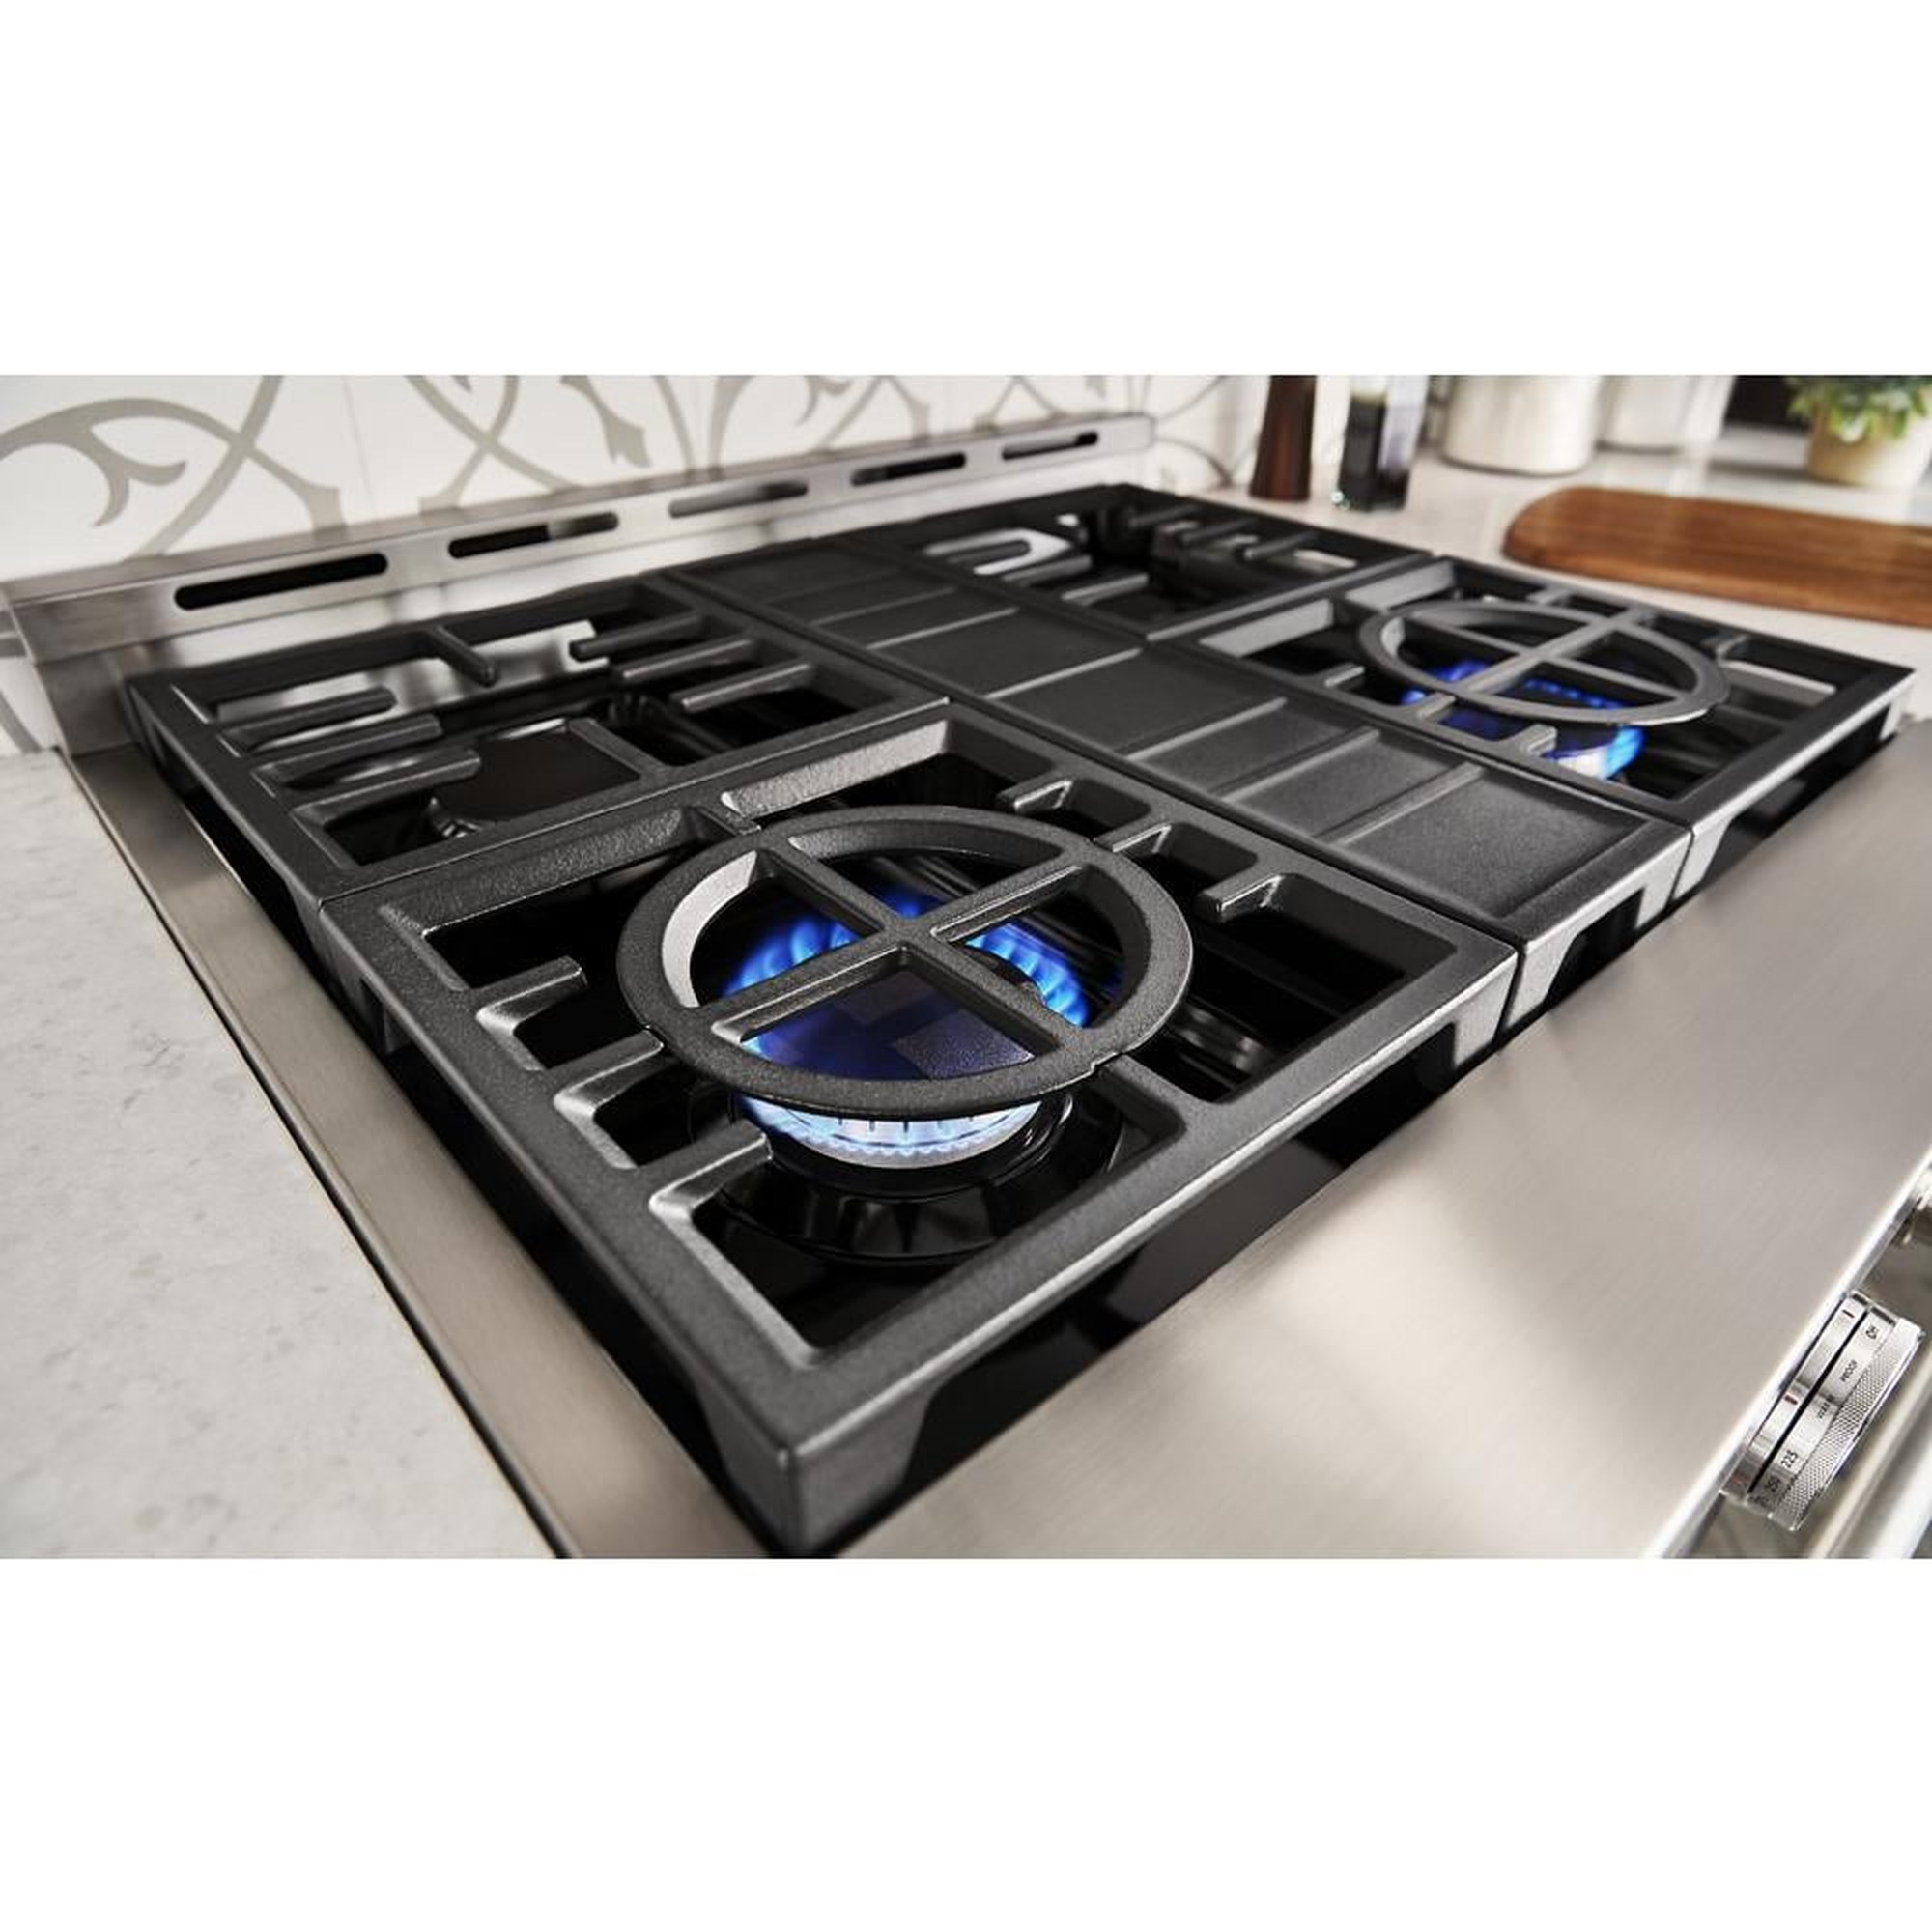 KitchenAid 36-inch Built-in Gas Cooktop with 5 Burners KGCC566RBL